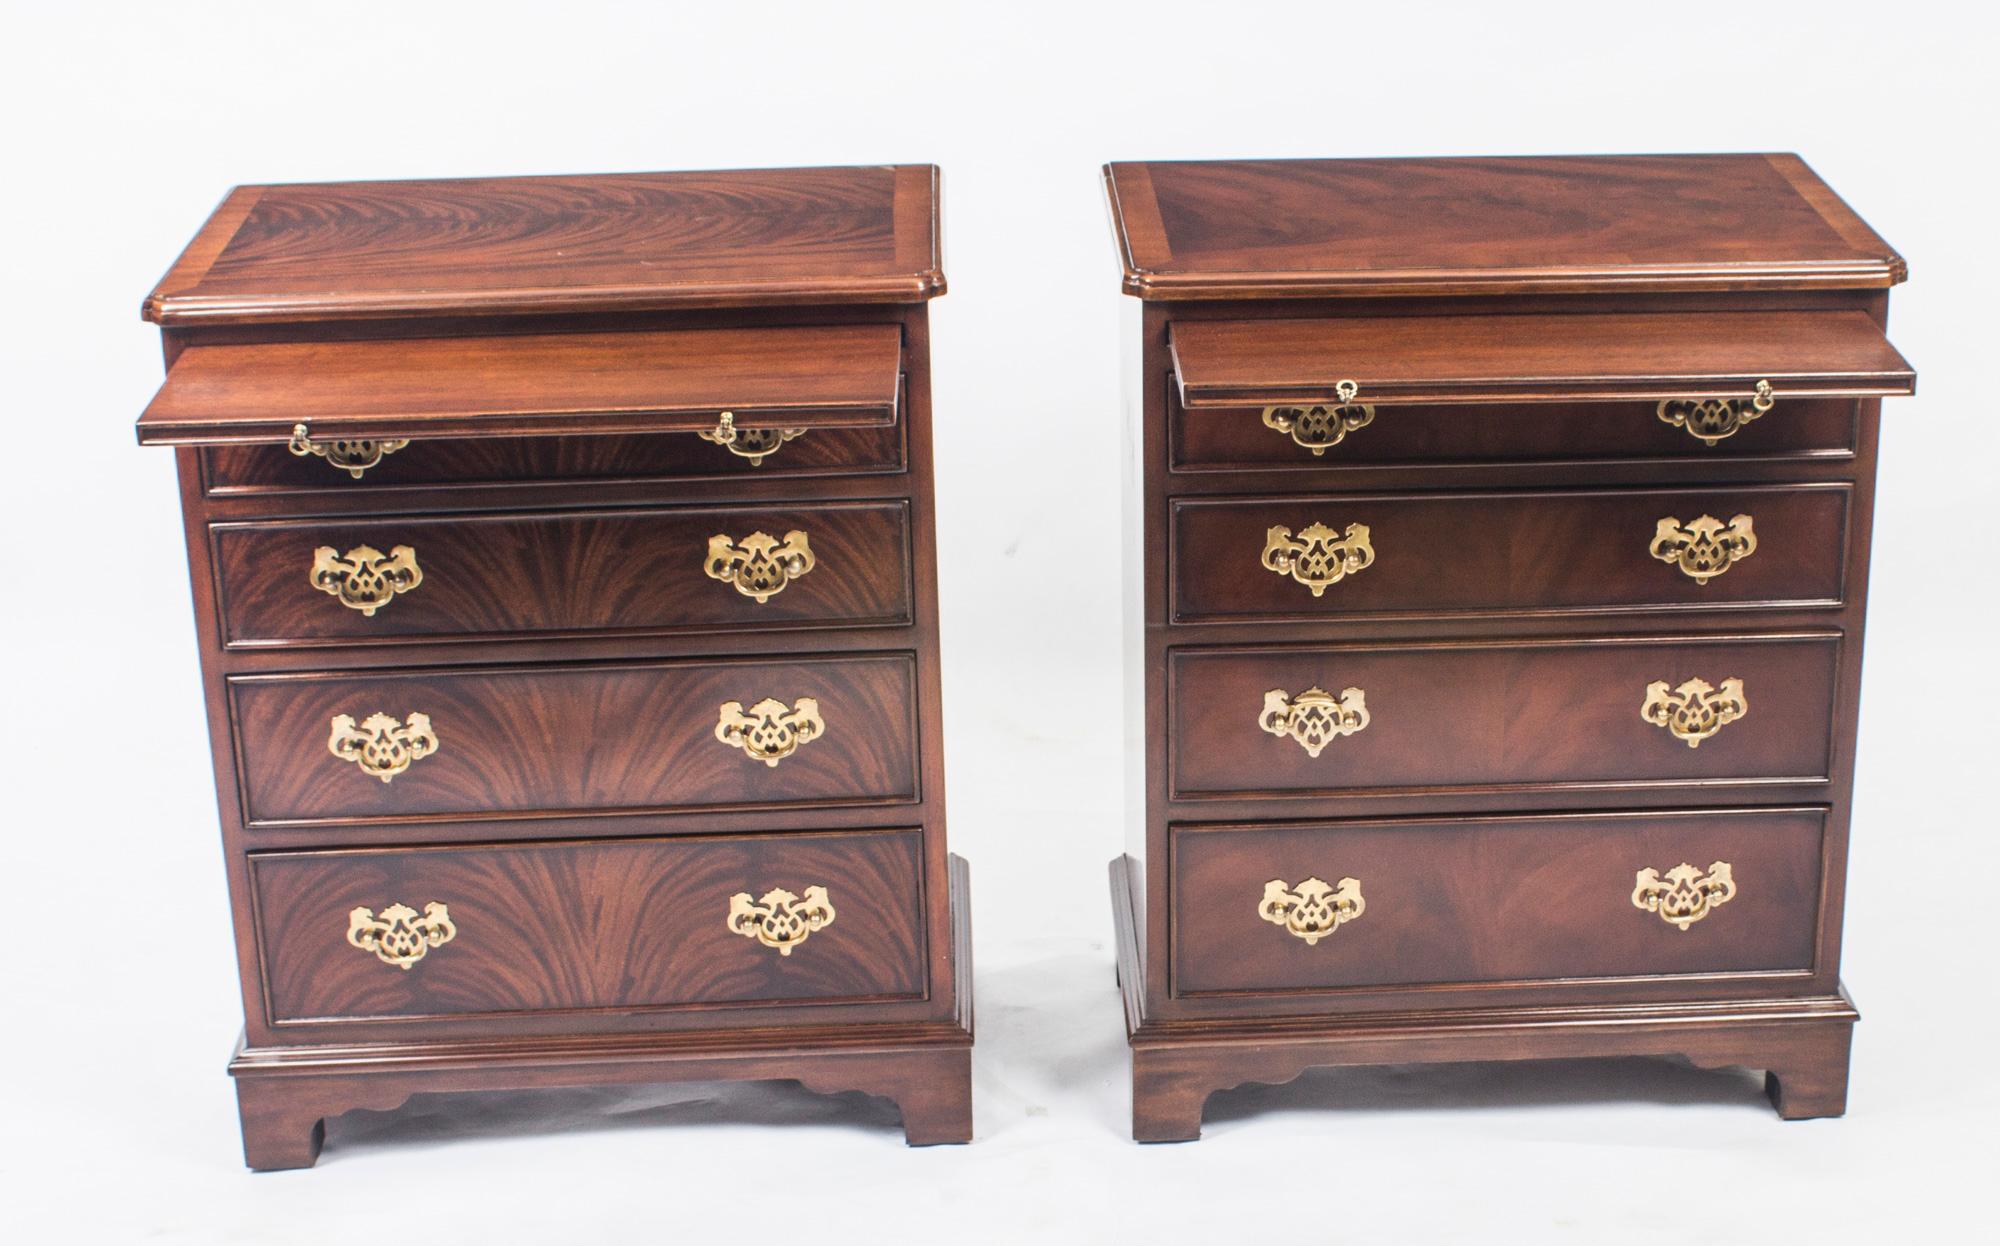 This is a beautiful pair of flame mahogany chests with slides in elegant Georgian style dating from the late 20th Century.

The chests are masterfully crafted from gorgeous flame mahogany and the tops have superb crossbanded decoration. They each